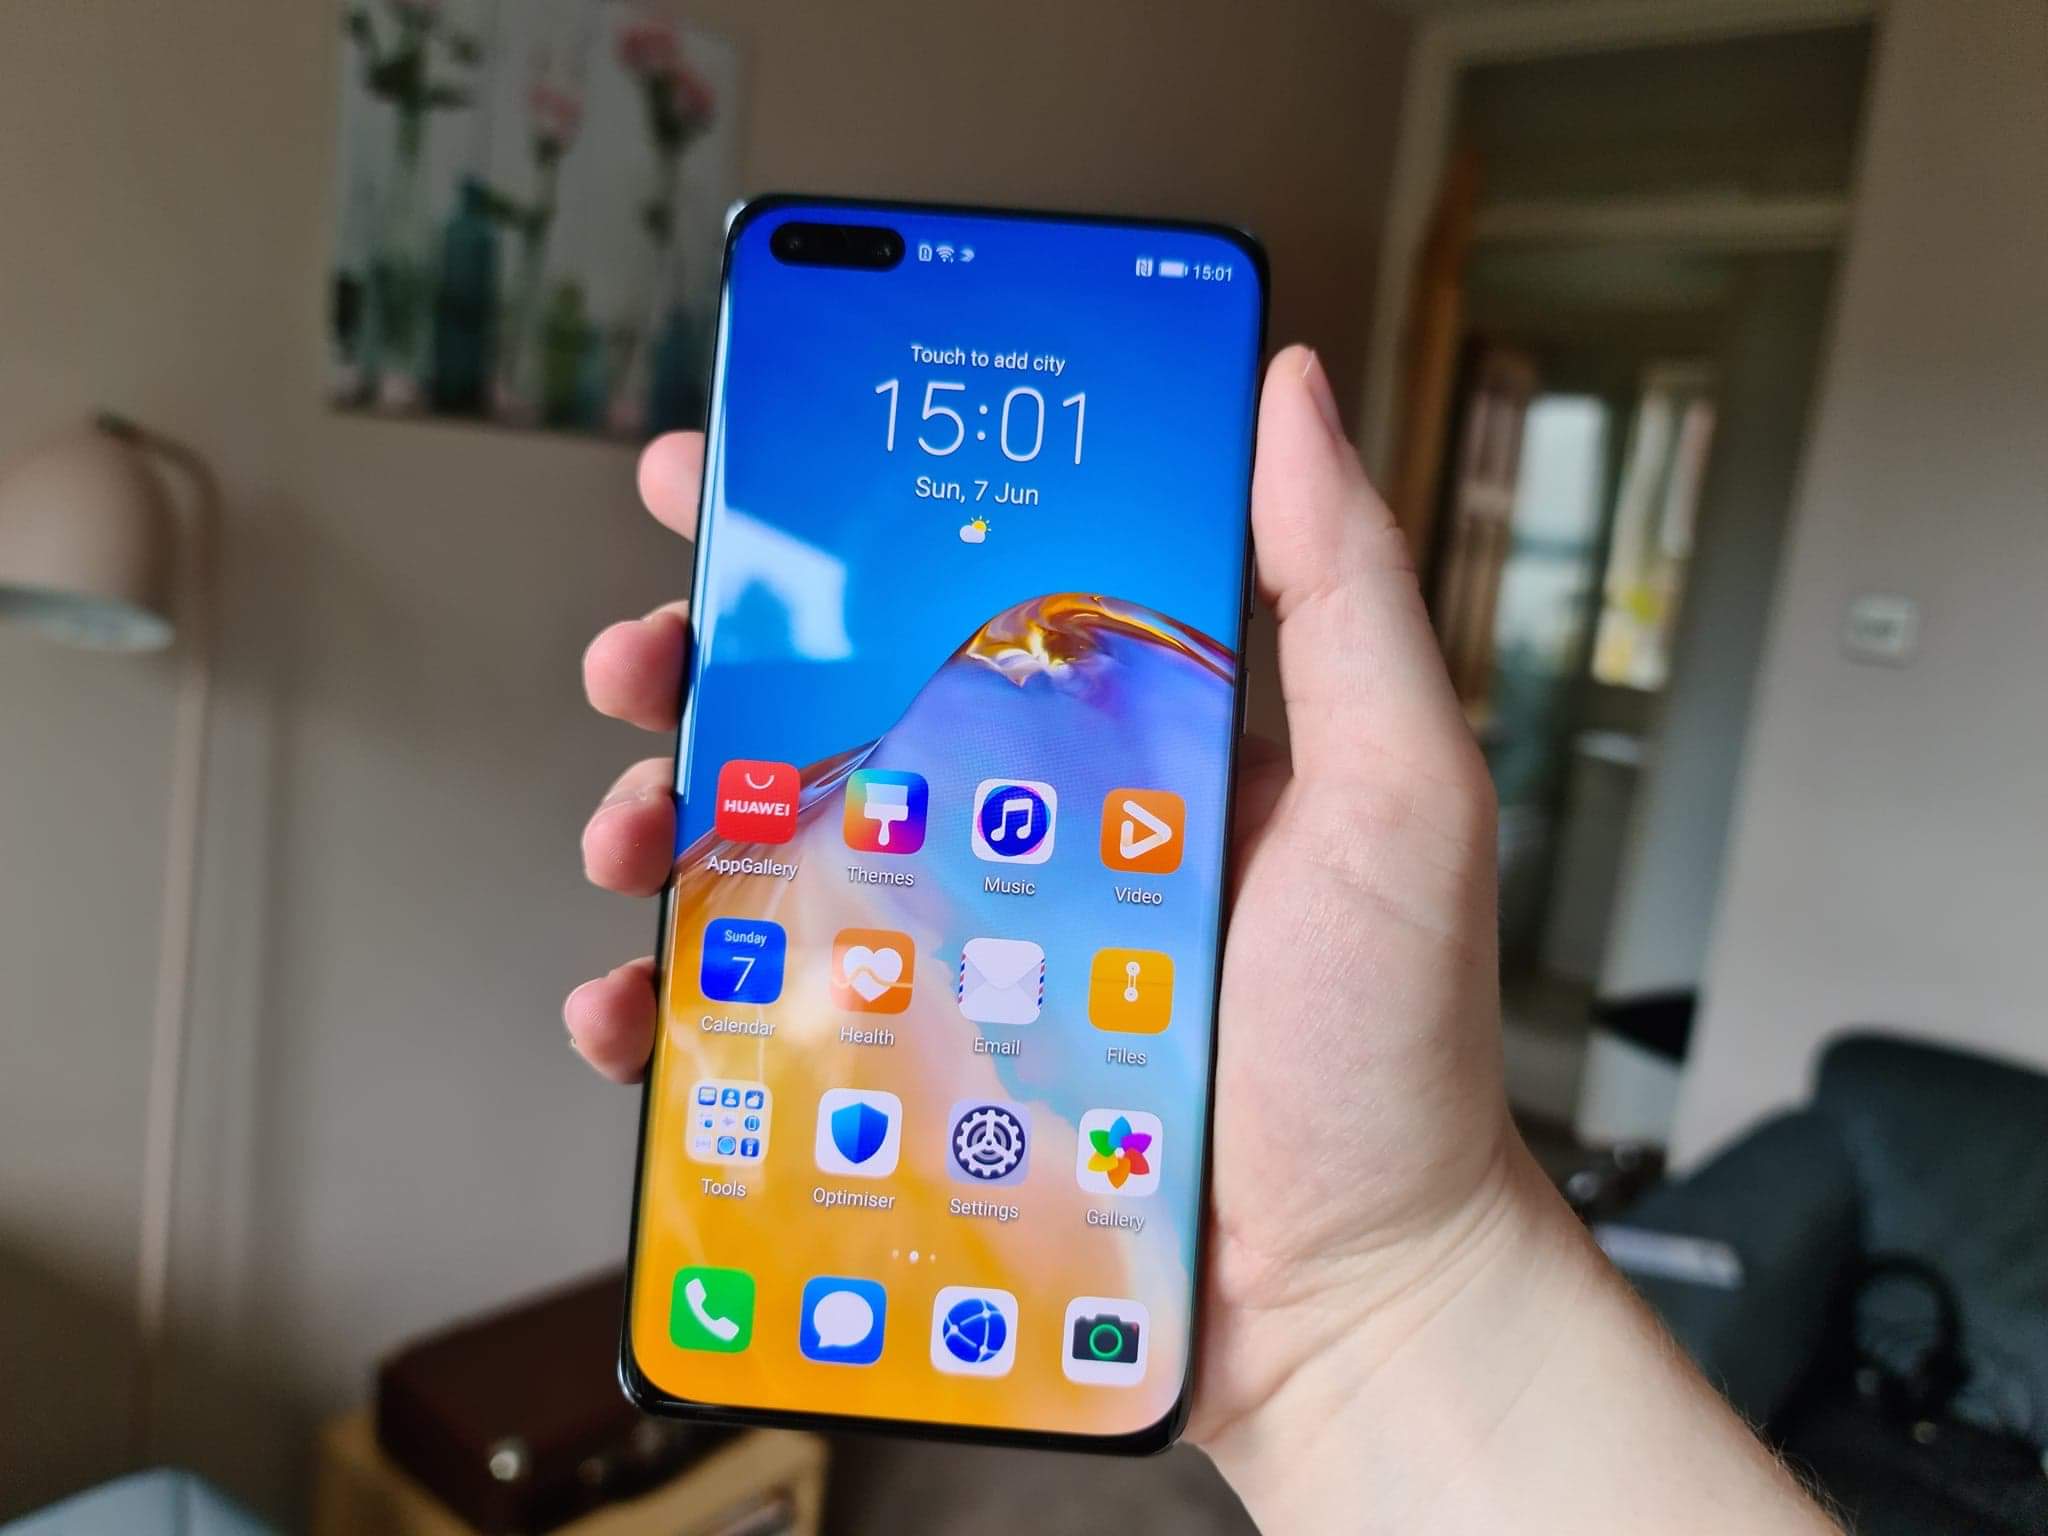 Plaats niet verwant hout Huawei P40 Pro Plus review: Great camera, but no Google apps